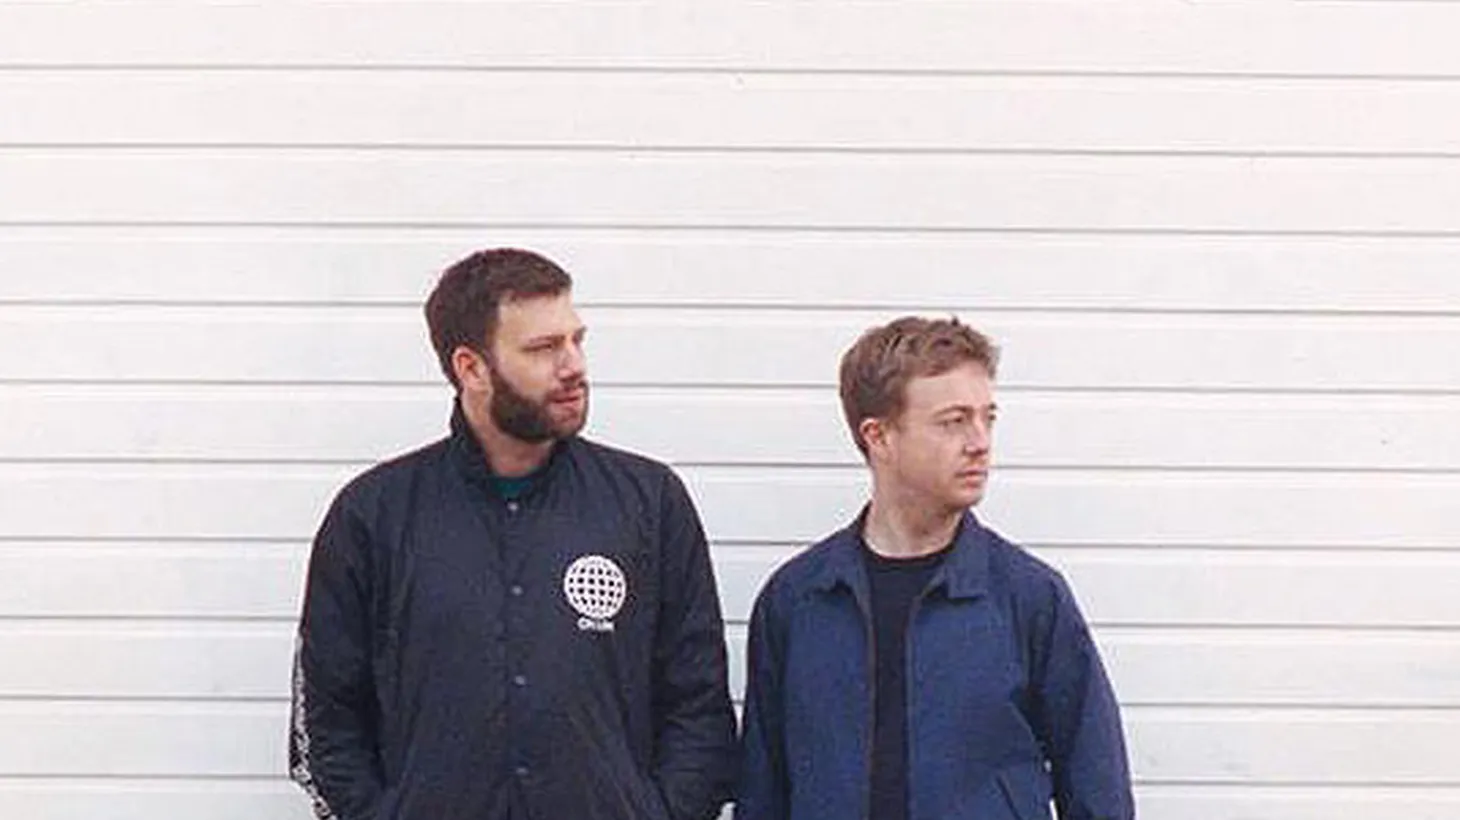 With the release of its very first EP in 2009, electronic duo Mount Kimbie announced its arrival as artists to watch.